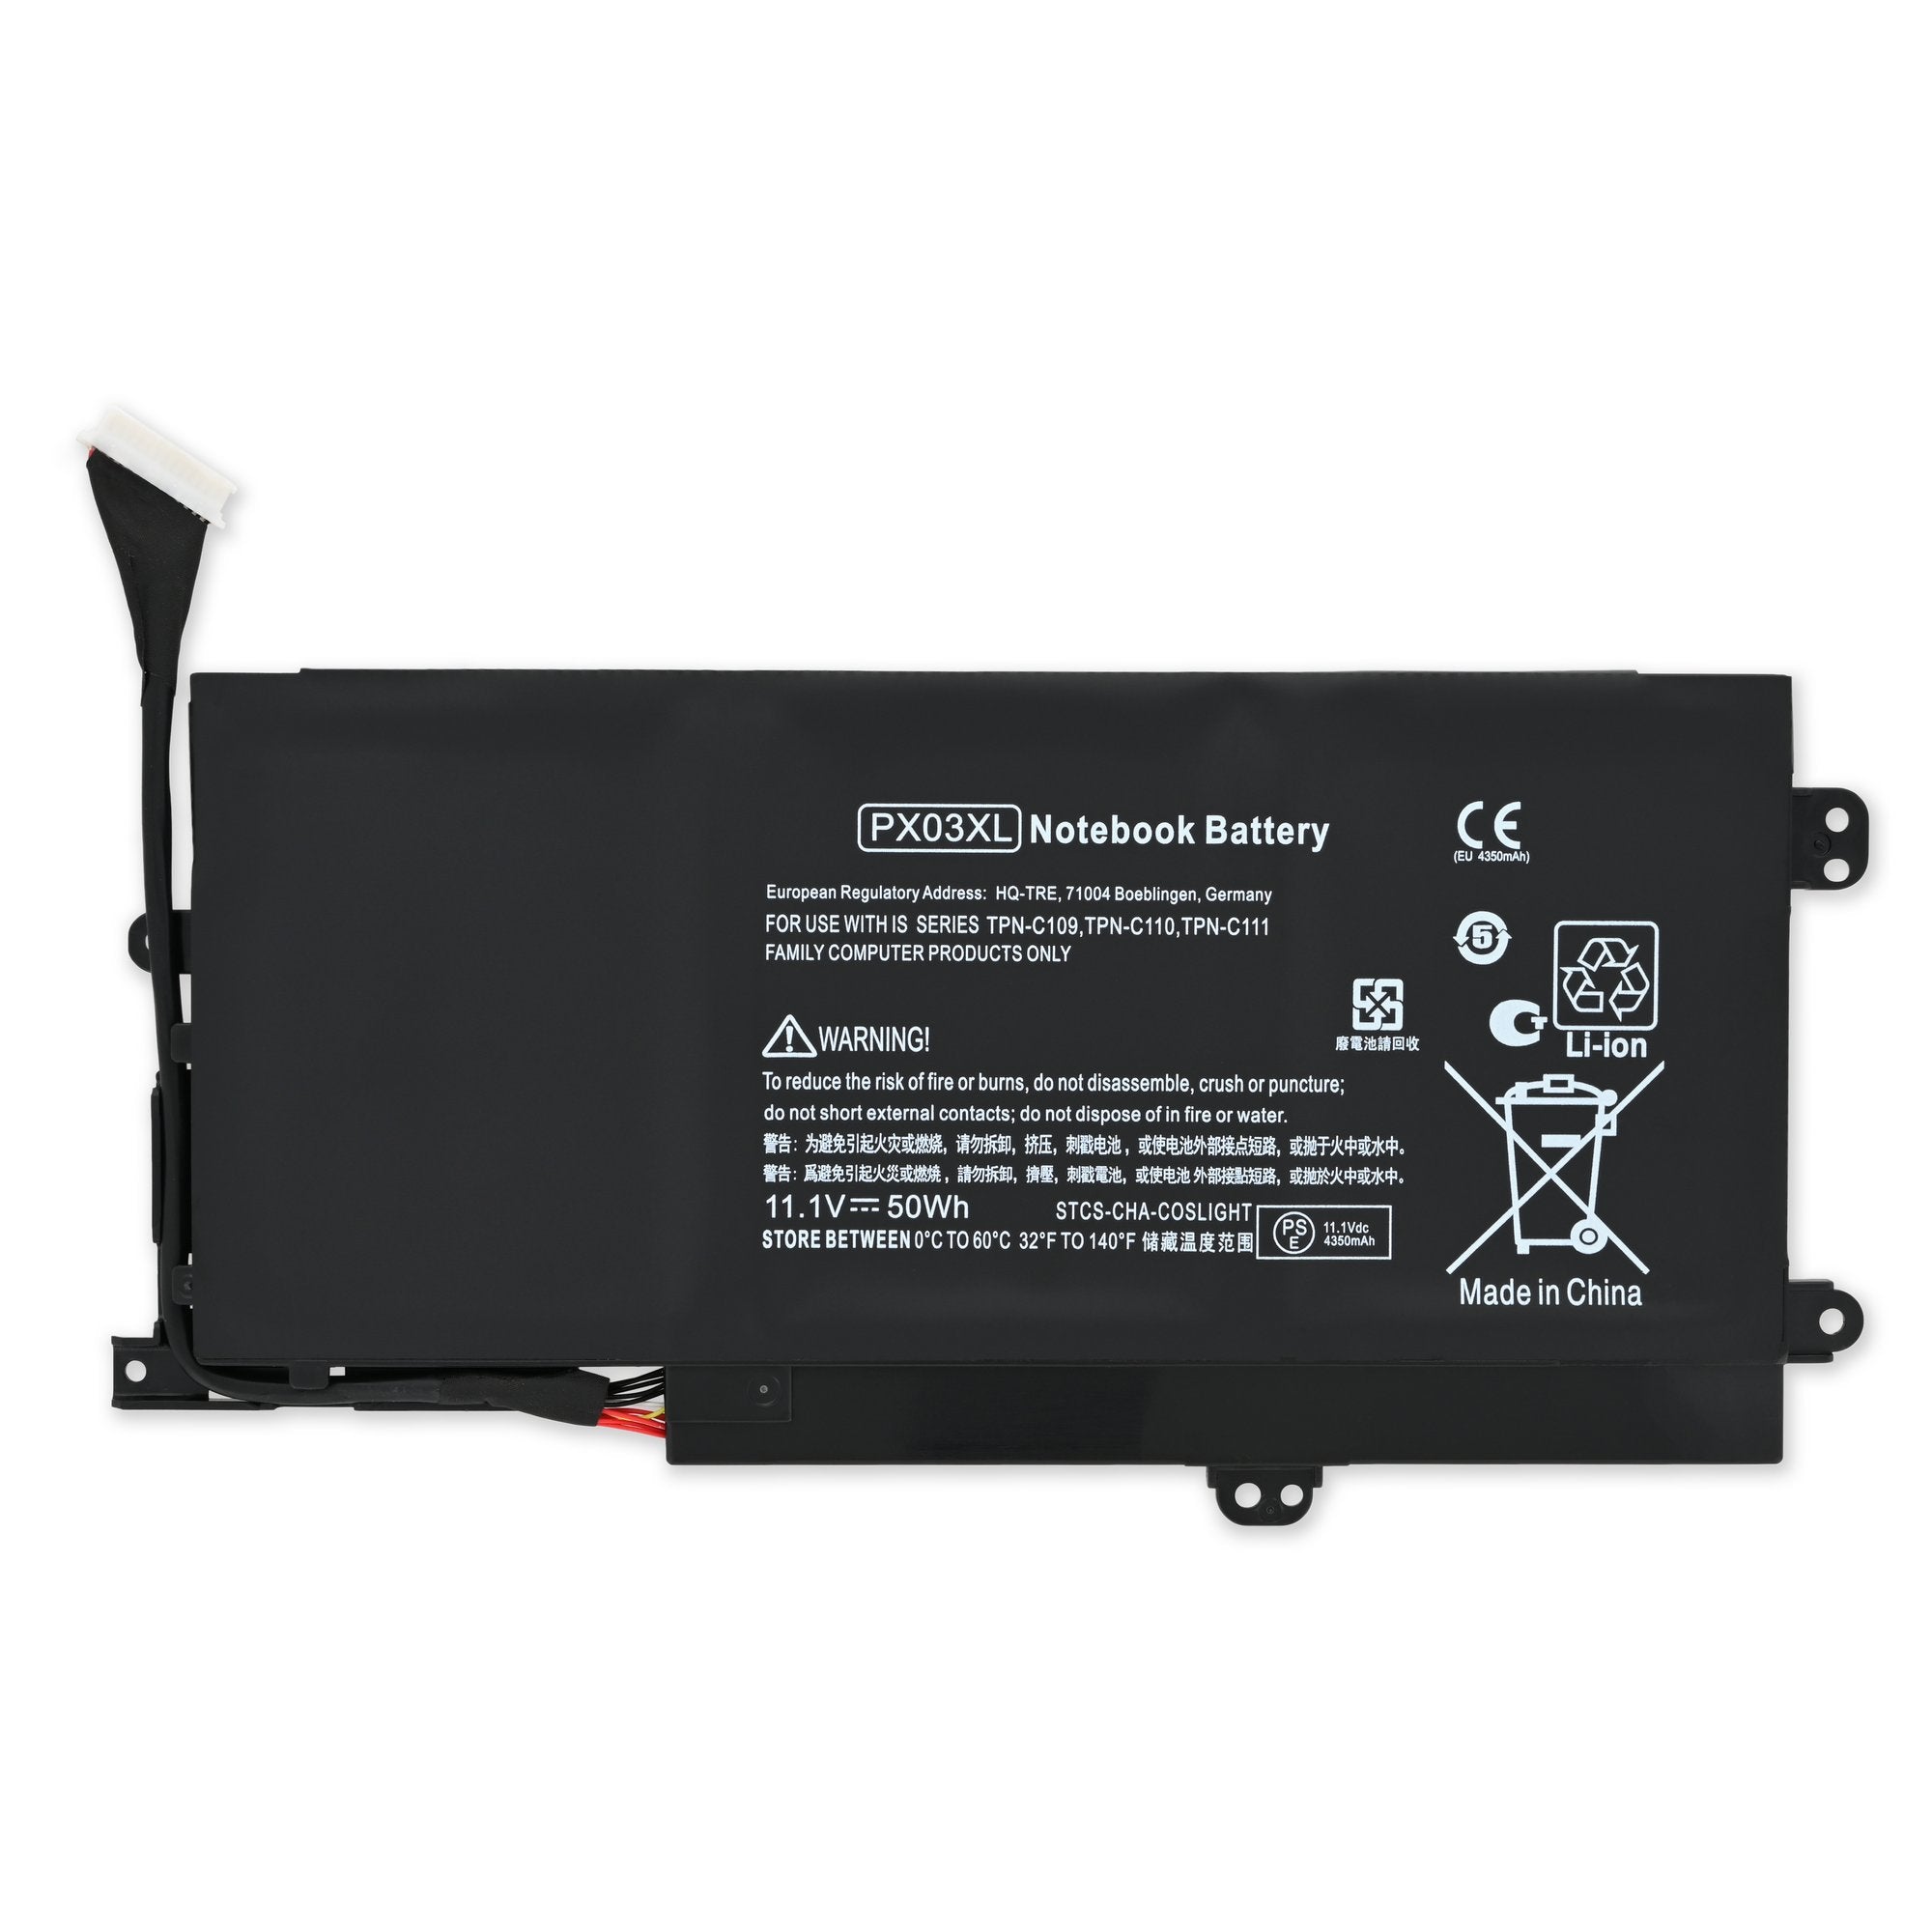 HP PX03XL Laptop Battery New Part Only